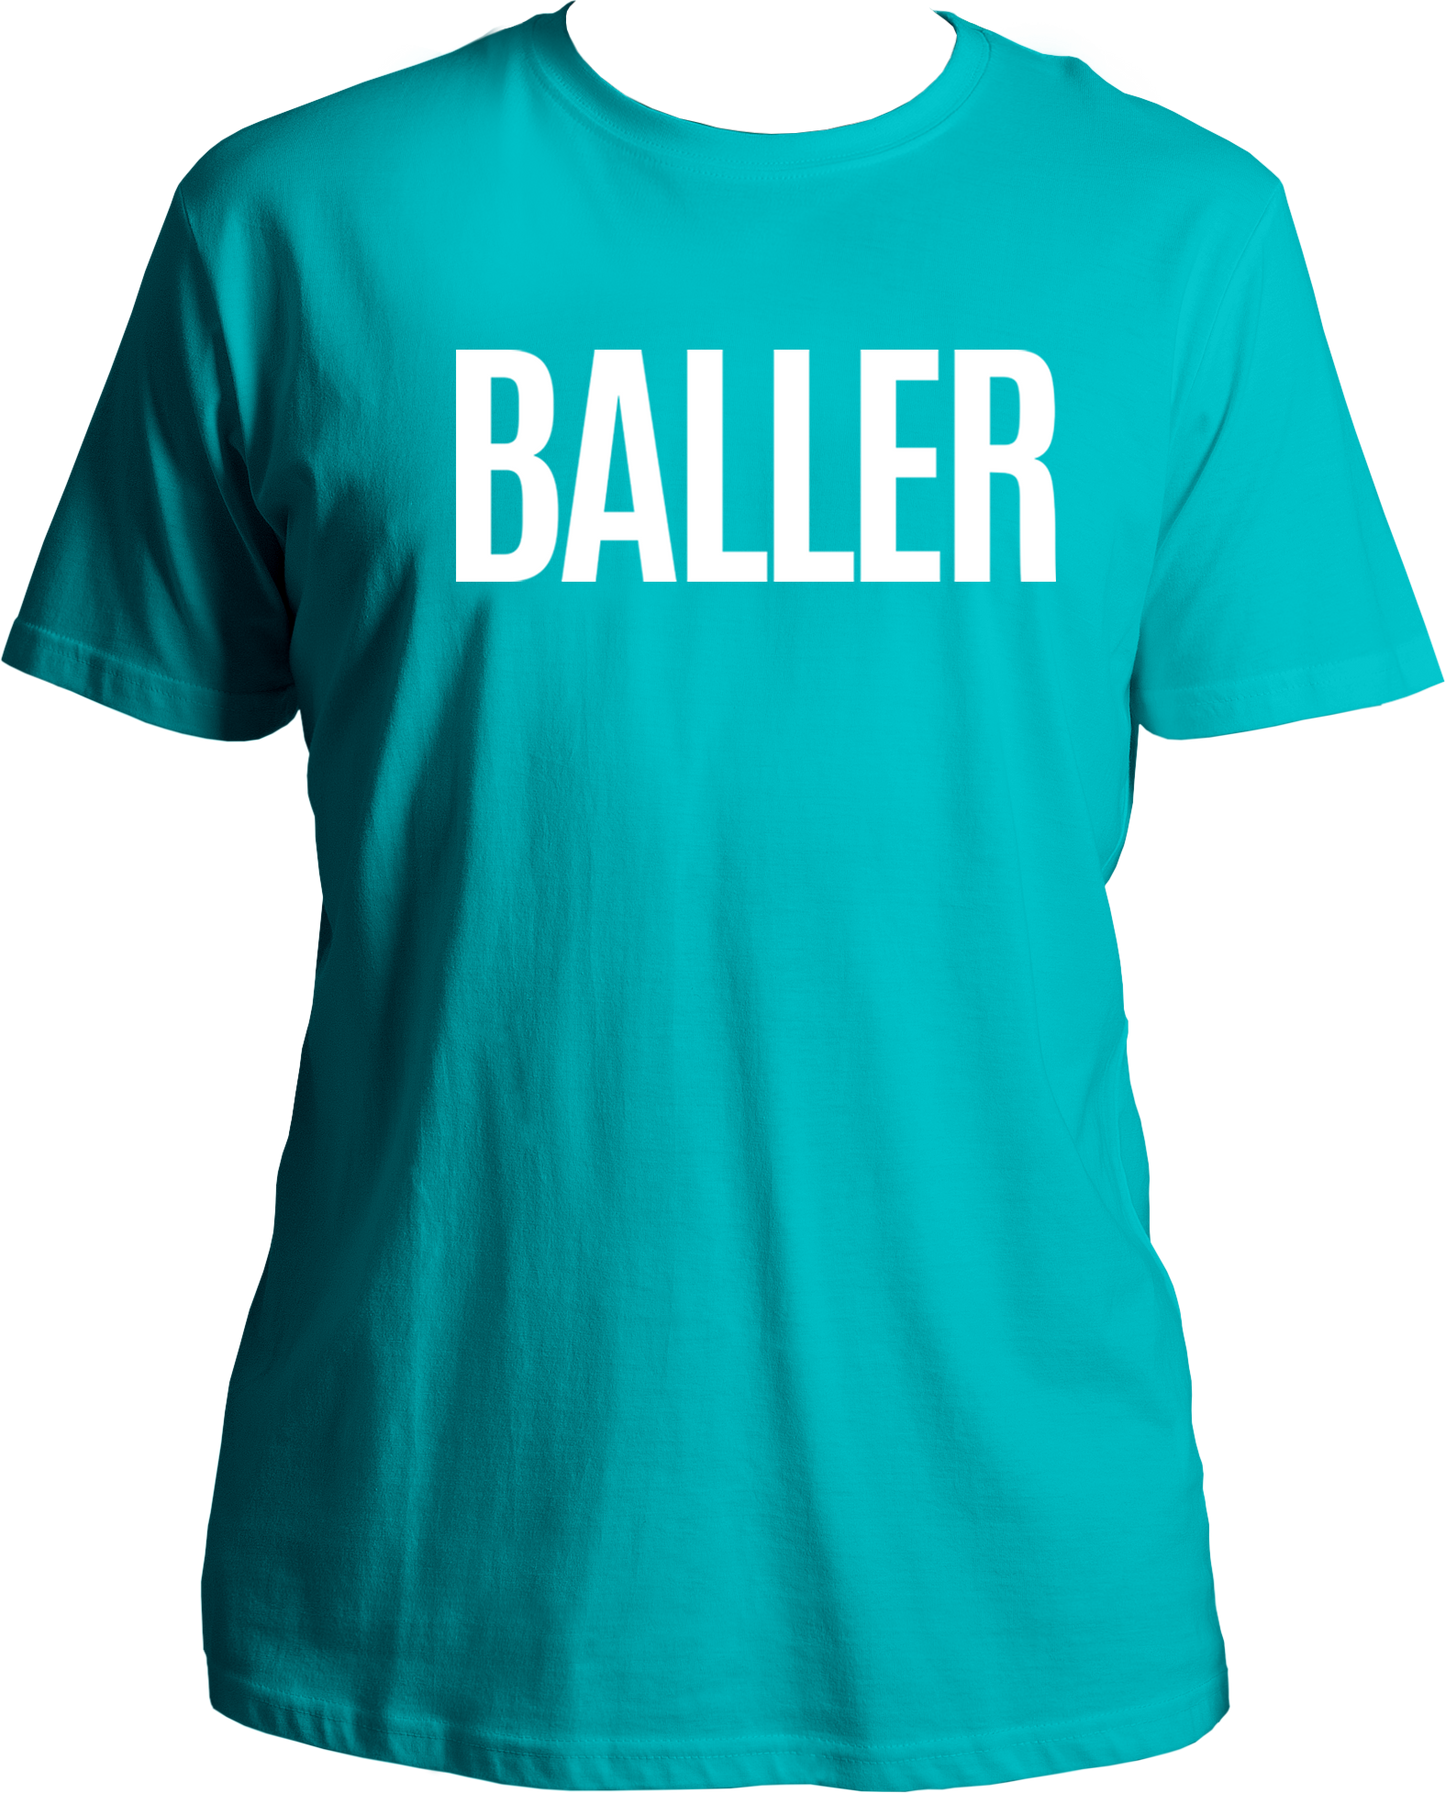 Introducing our exclusive Unisex "Baller" Round Neck Cotton T-Shirt – a fashion statement inspired by the swag and style of Shubh's Punjabi hit, "Baller." This isn't just a tee; it's a lifestyle, a celebration of confidence, and a nod to the high-energy vibes of the music scene.